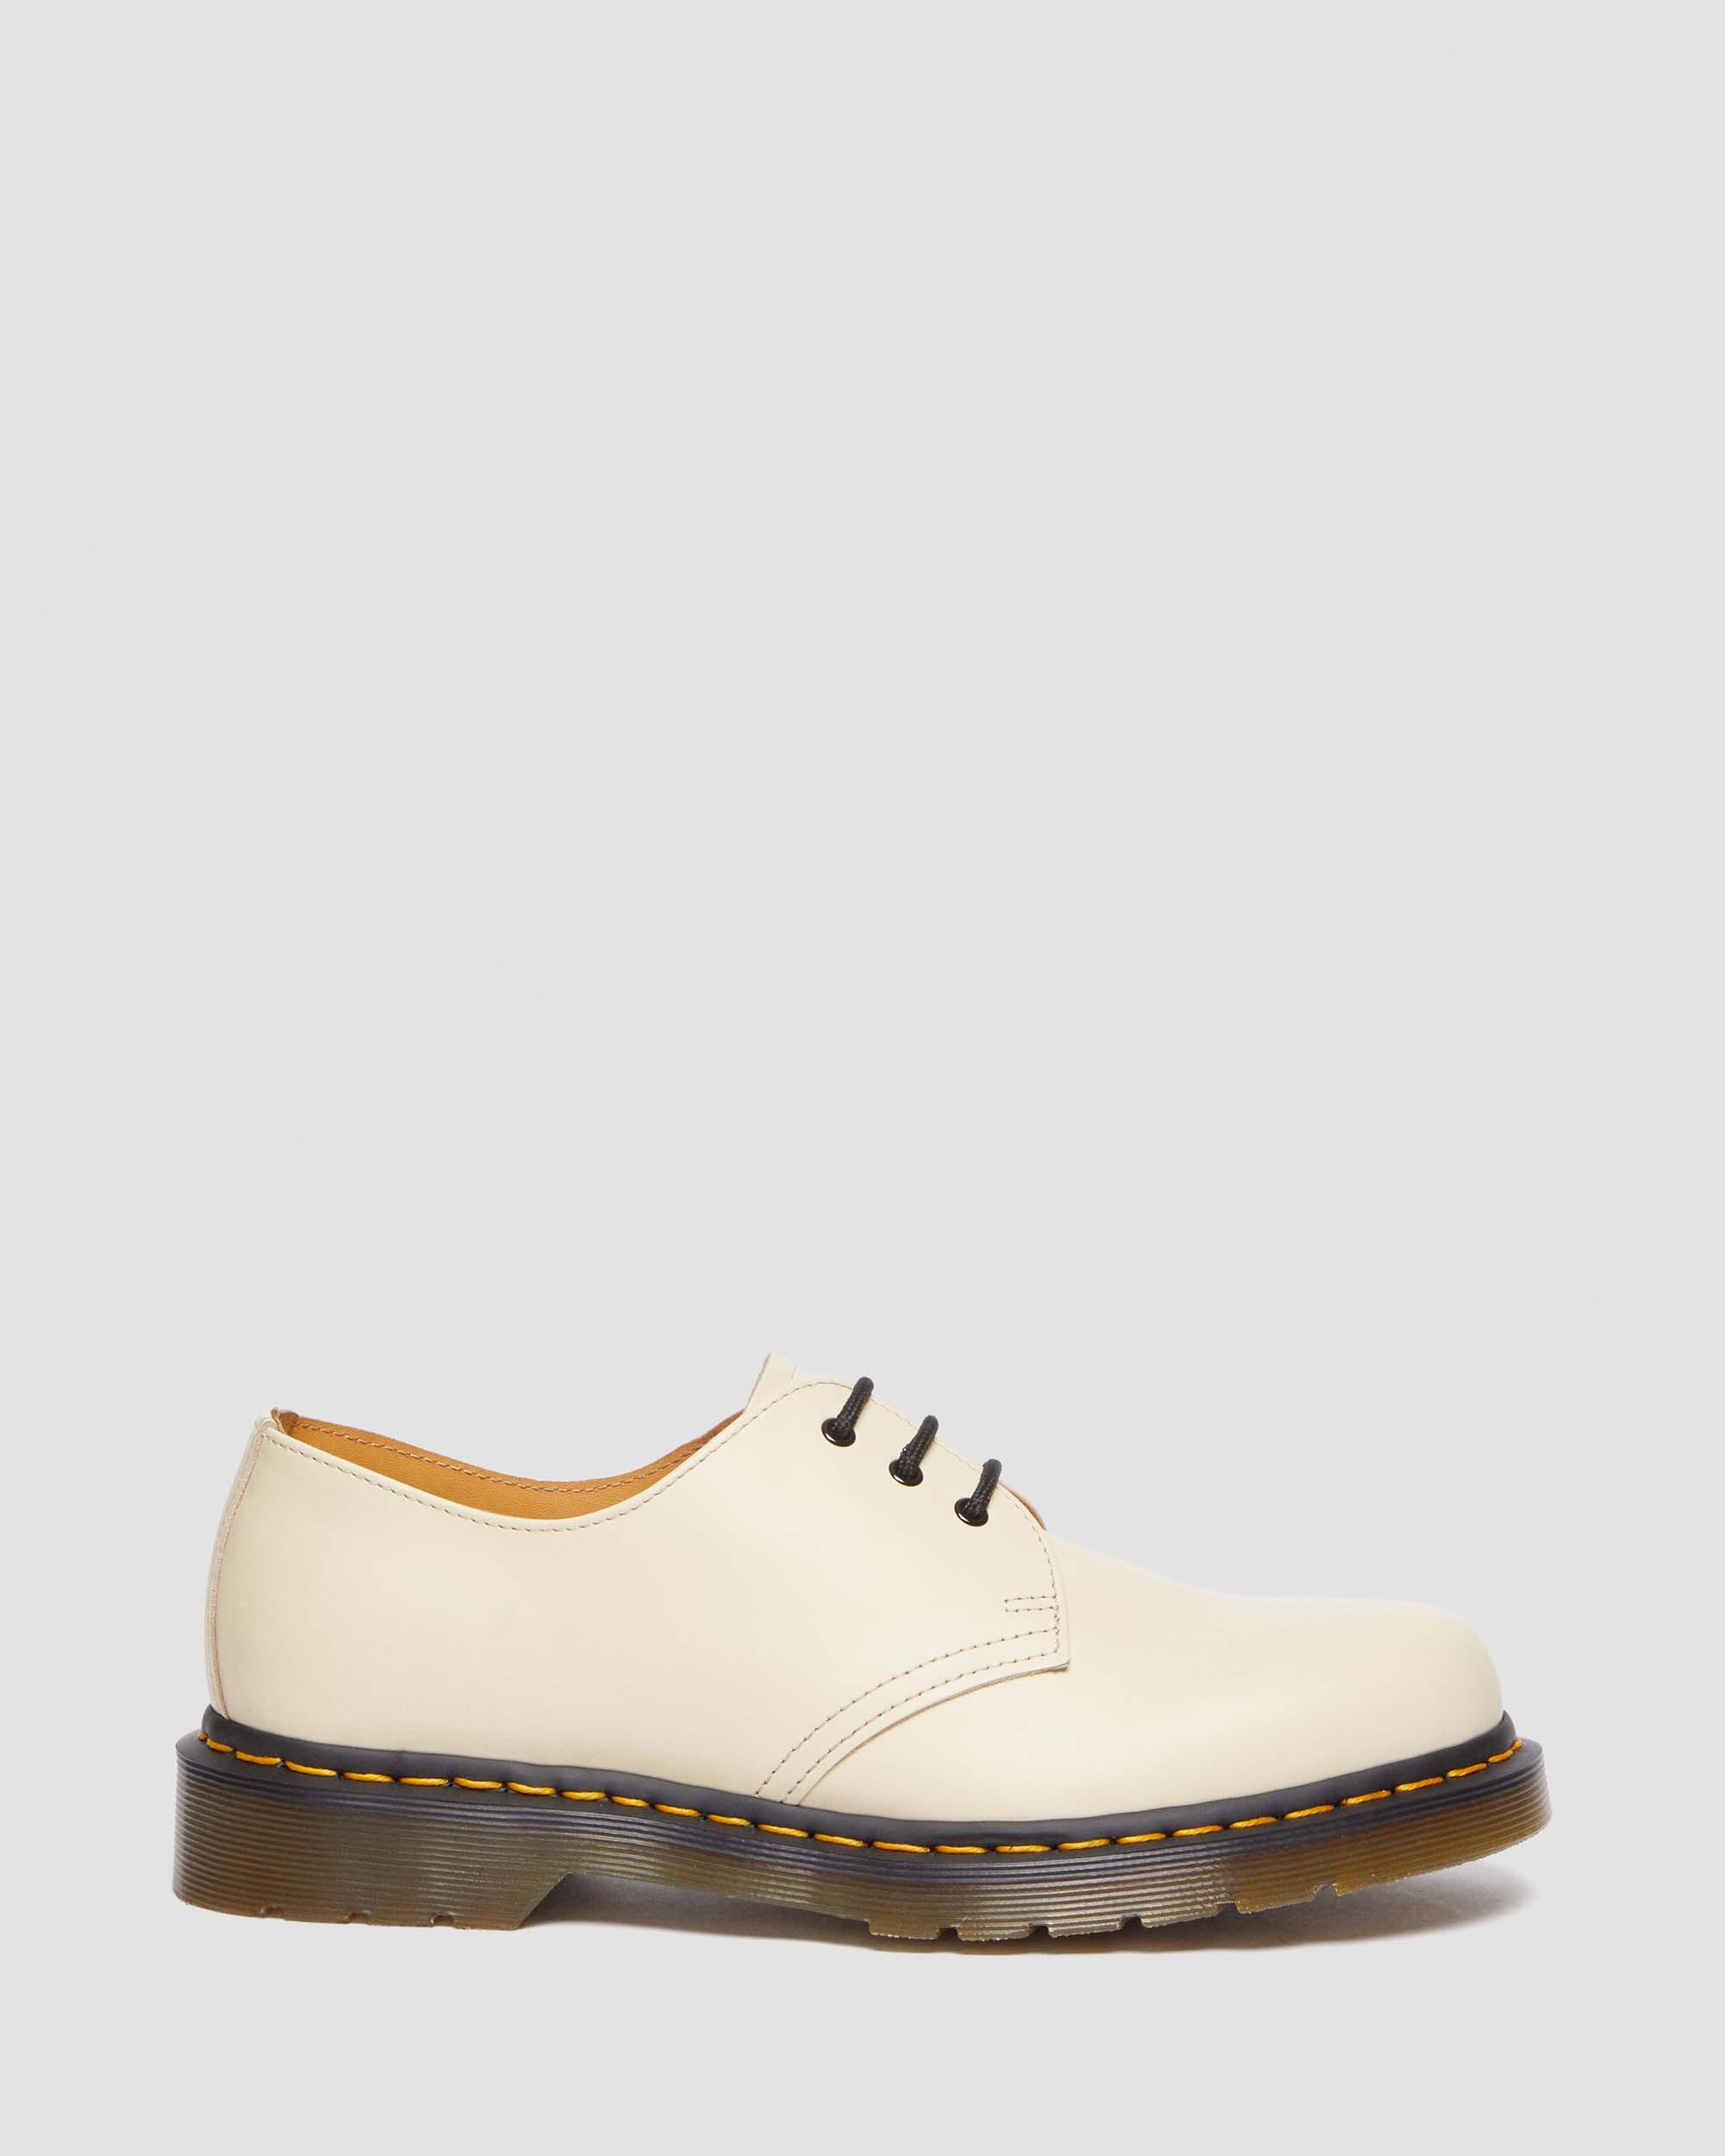 DR MARTENS 1461 Smooth Leather Oxford Shoes